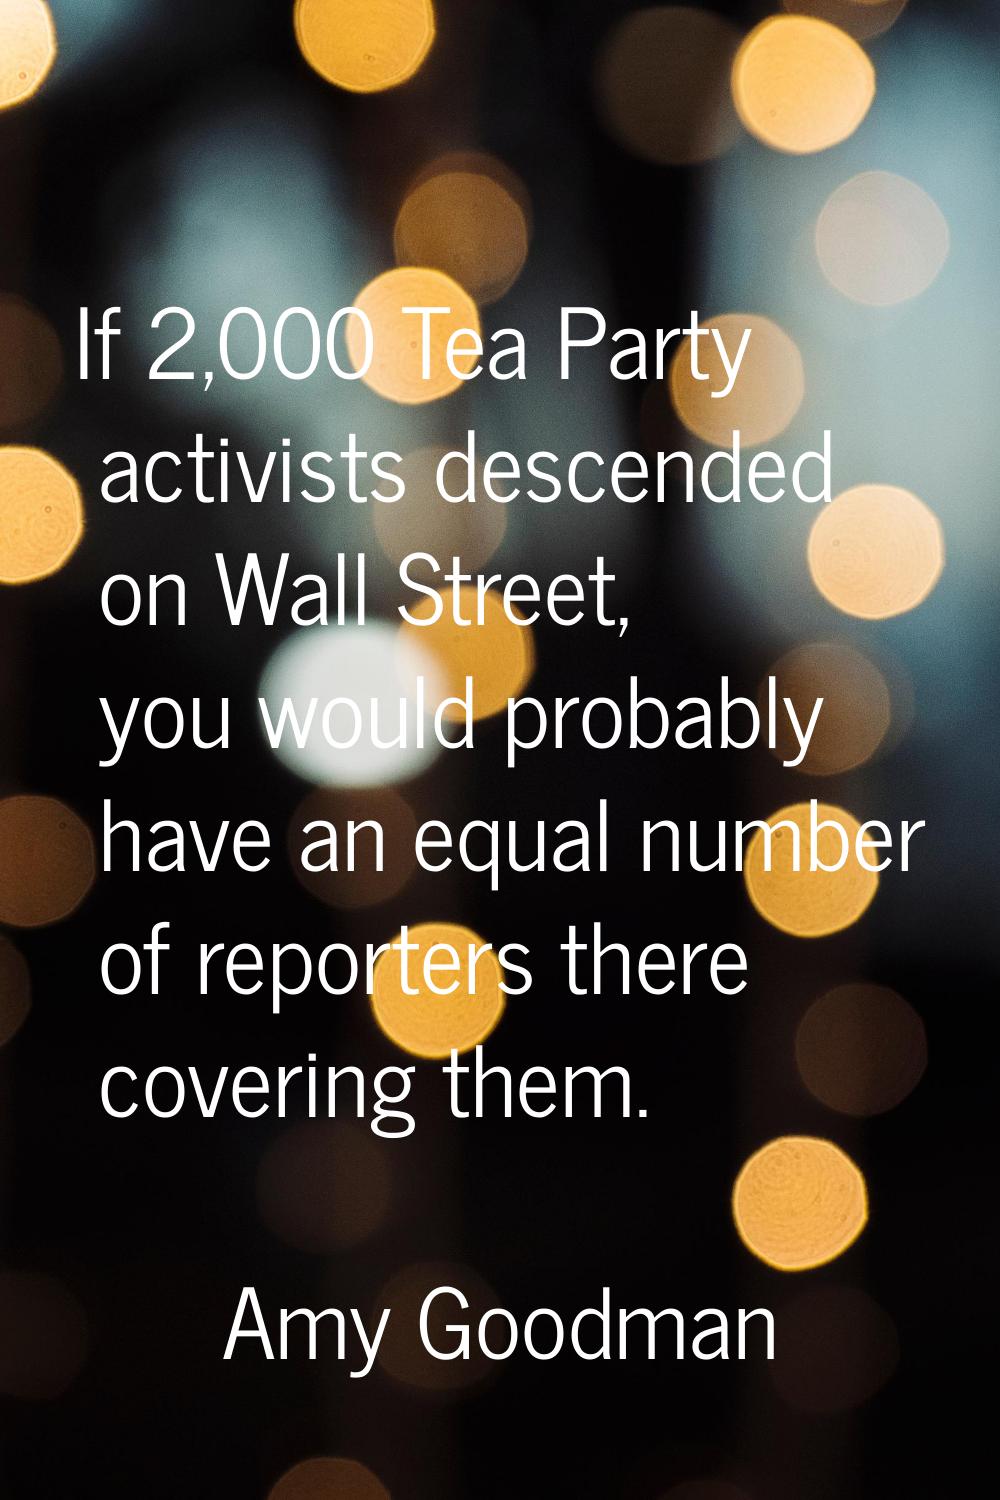 If 2,000 Tea Party activists descended on Wall Street, you would probably have an equal number of r